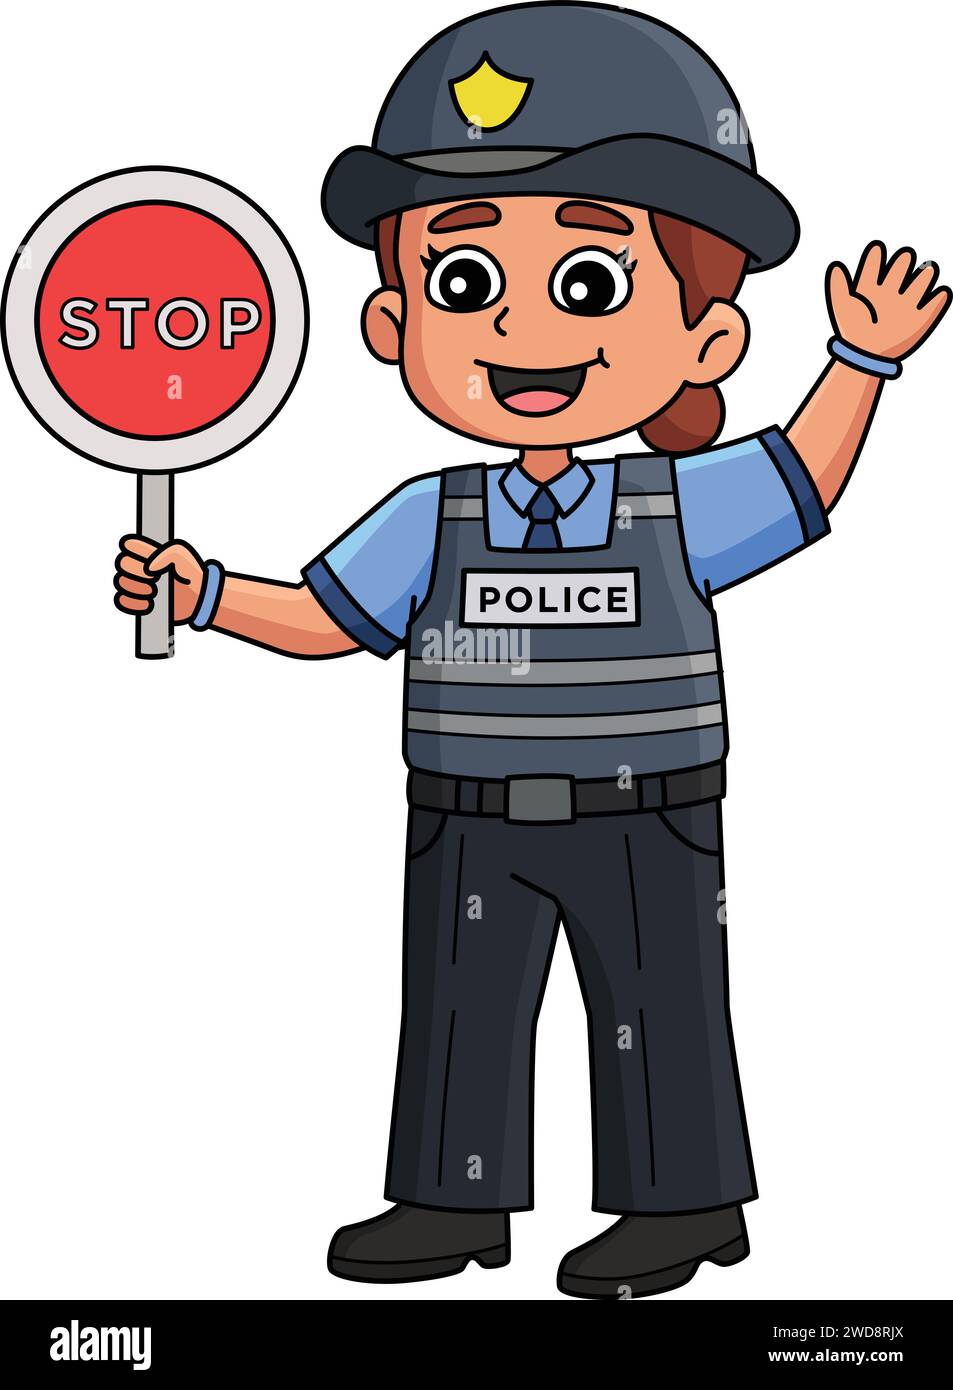 Police Traffic Officer Holding Stop Sign Cartoon Colored Stock Vector